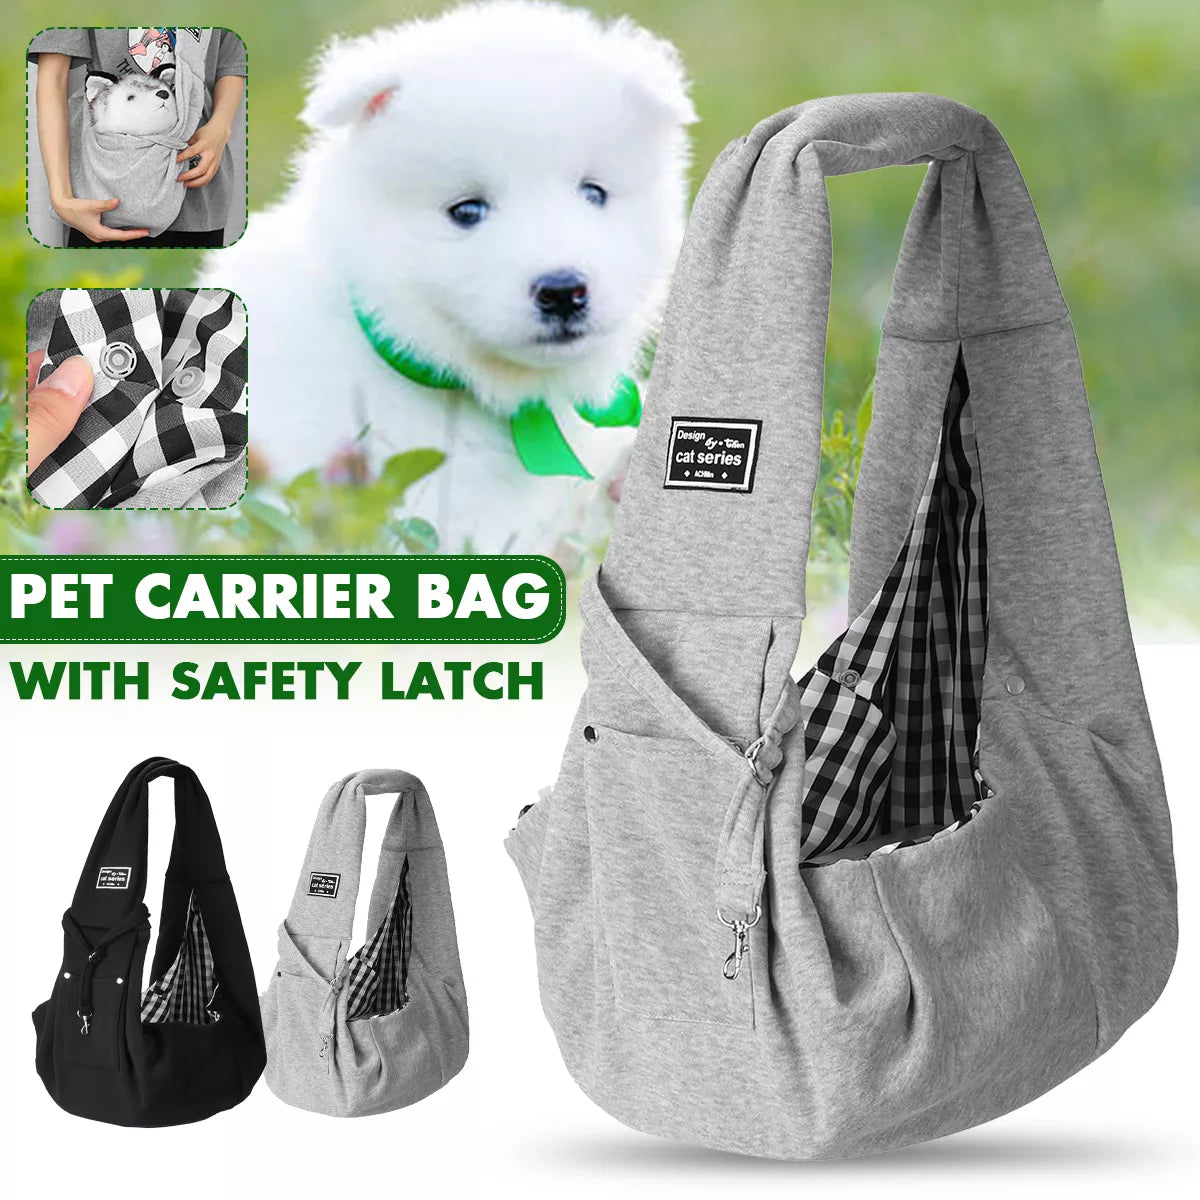 Cotton shoulder bag for dogs and cats - 3 colors